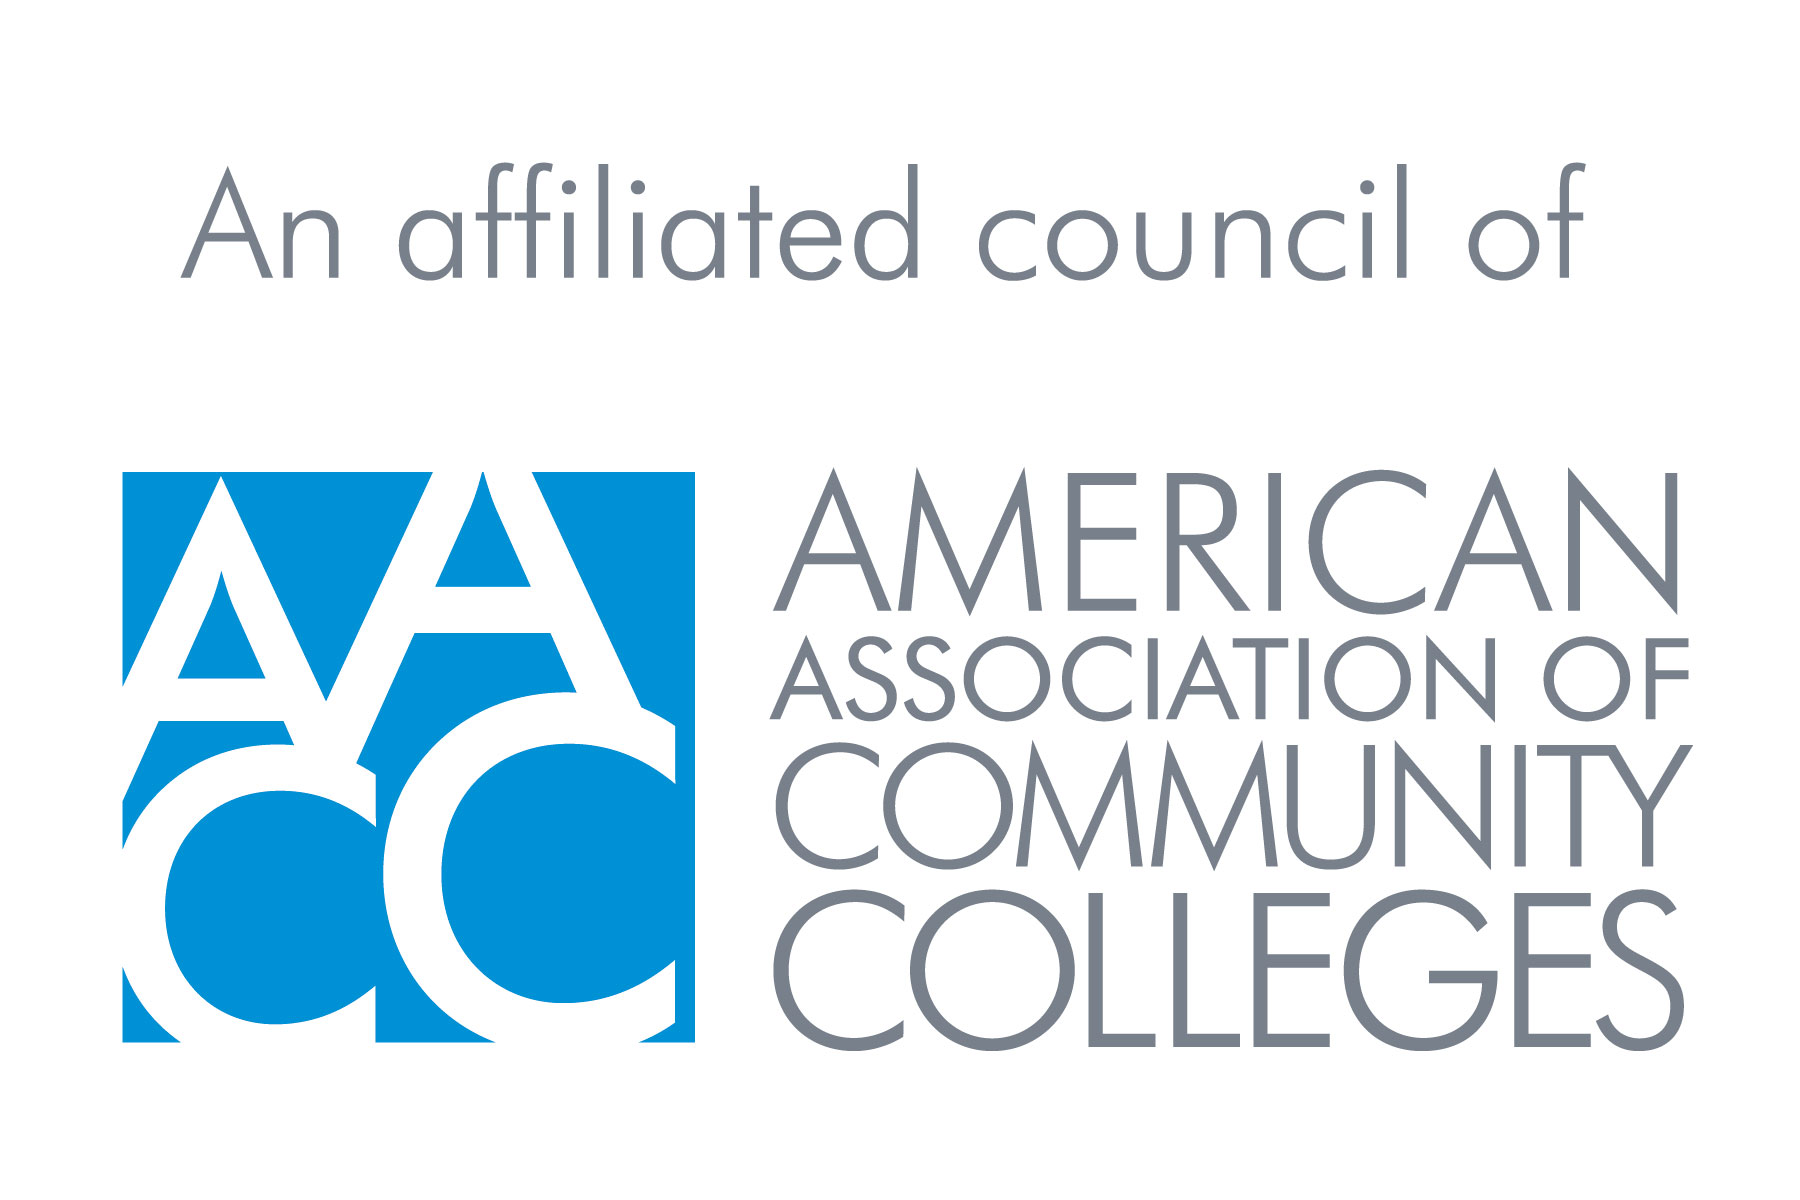  The American Association of Community Colleges (AACC) is the primary advocacy organization for the nation\'s community colleges. The association represents nearly 1,200 two-year, associate degree-granting institutions and more than 13 million students.